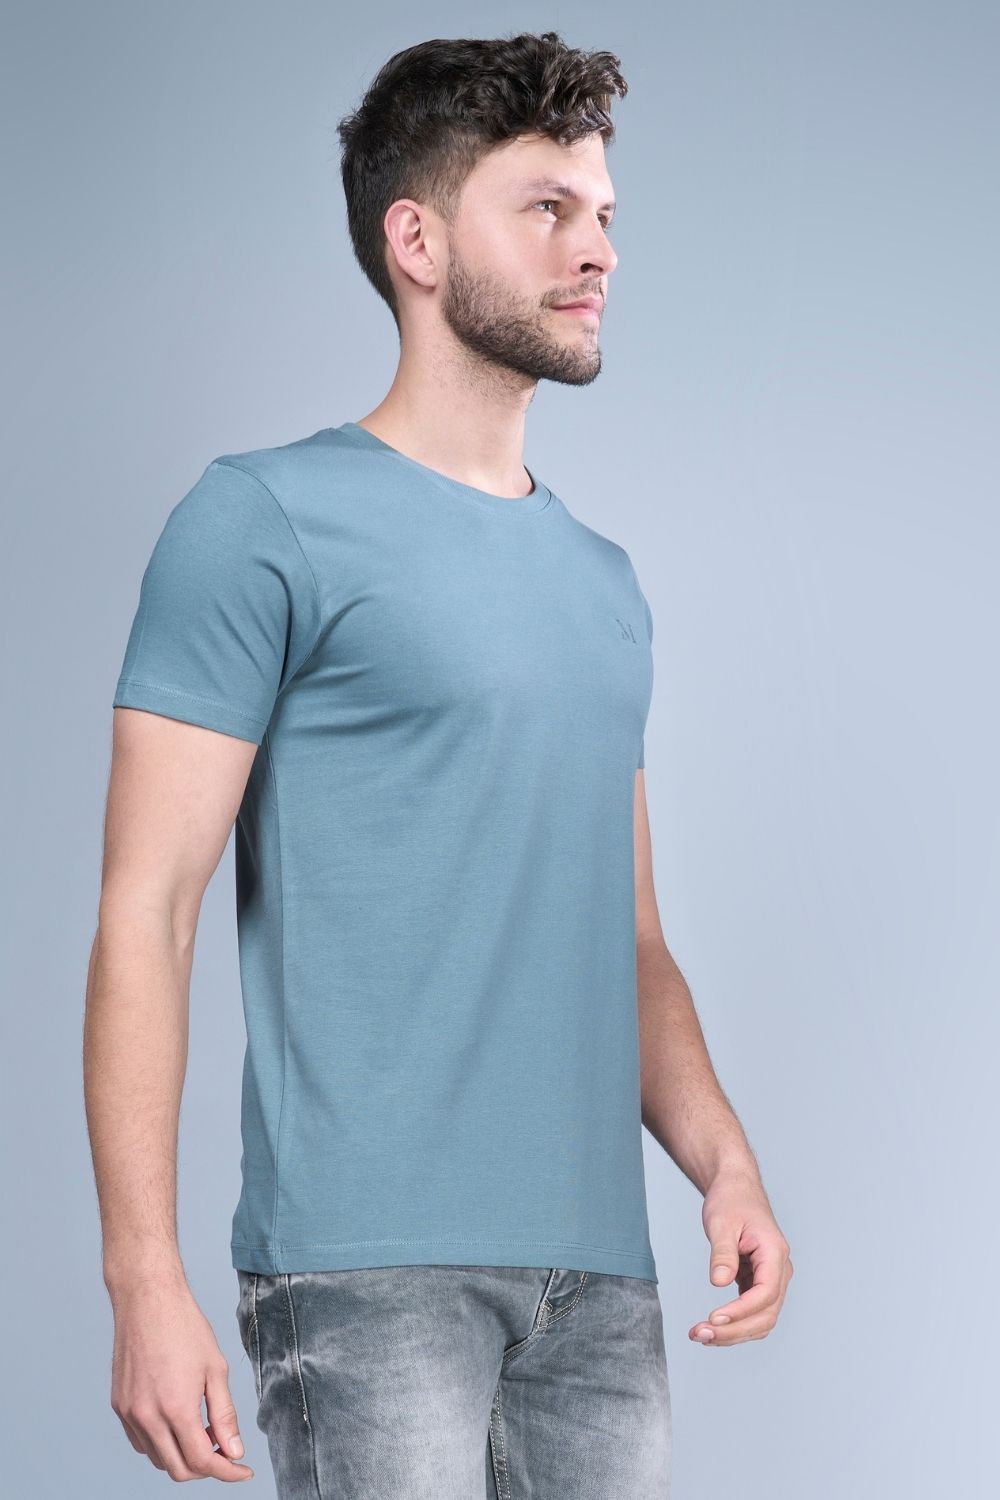 grey colored, cotton Graphic T shirt for men with half sleeves and round neck, side view.